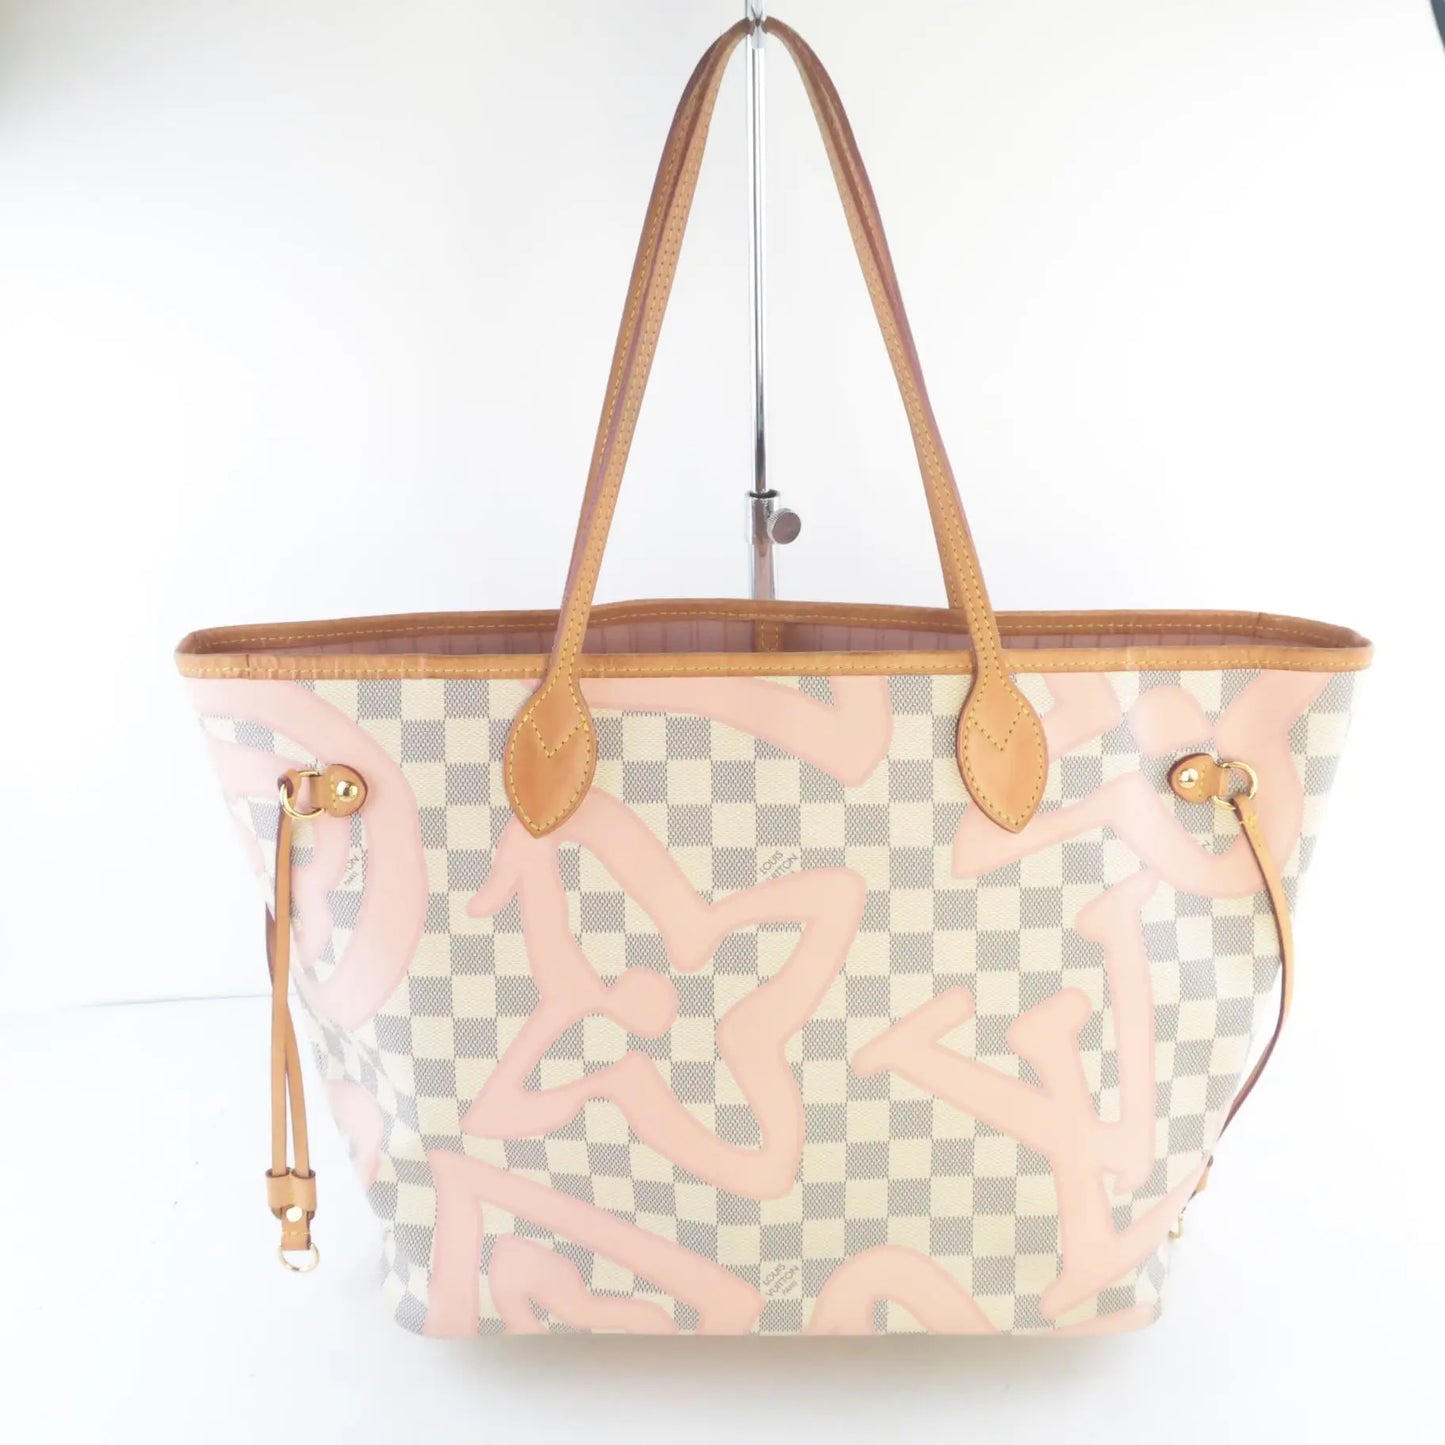 Louis Vuitton Damier Azur Tahitienne Neverfull Bag Tote MM LE at